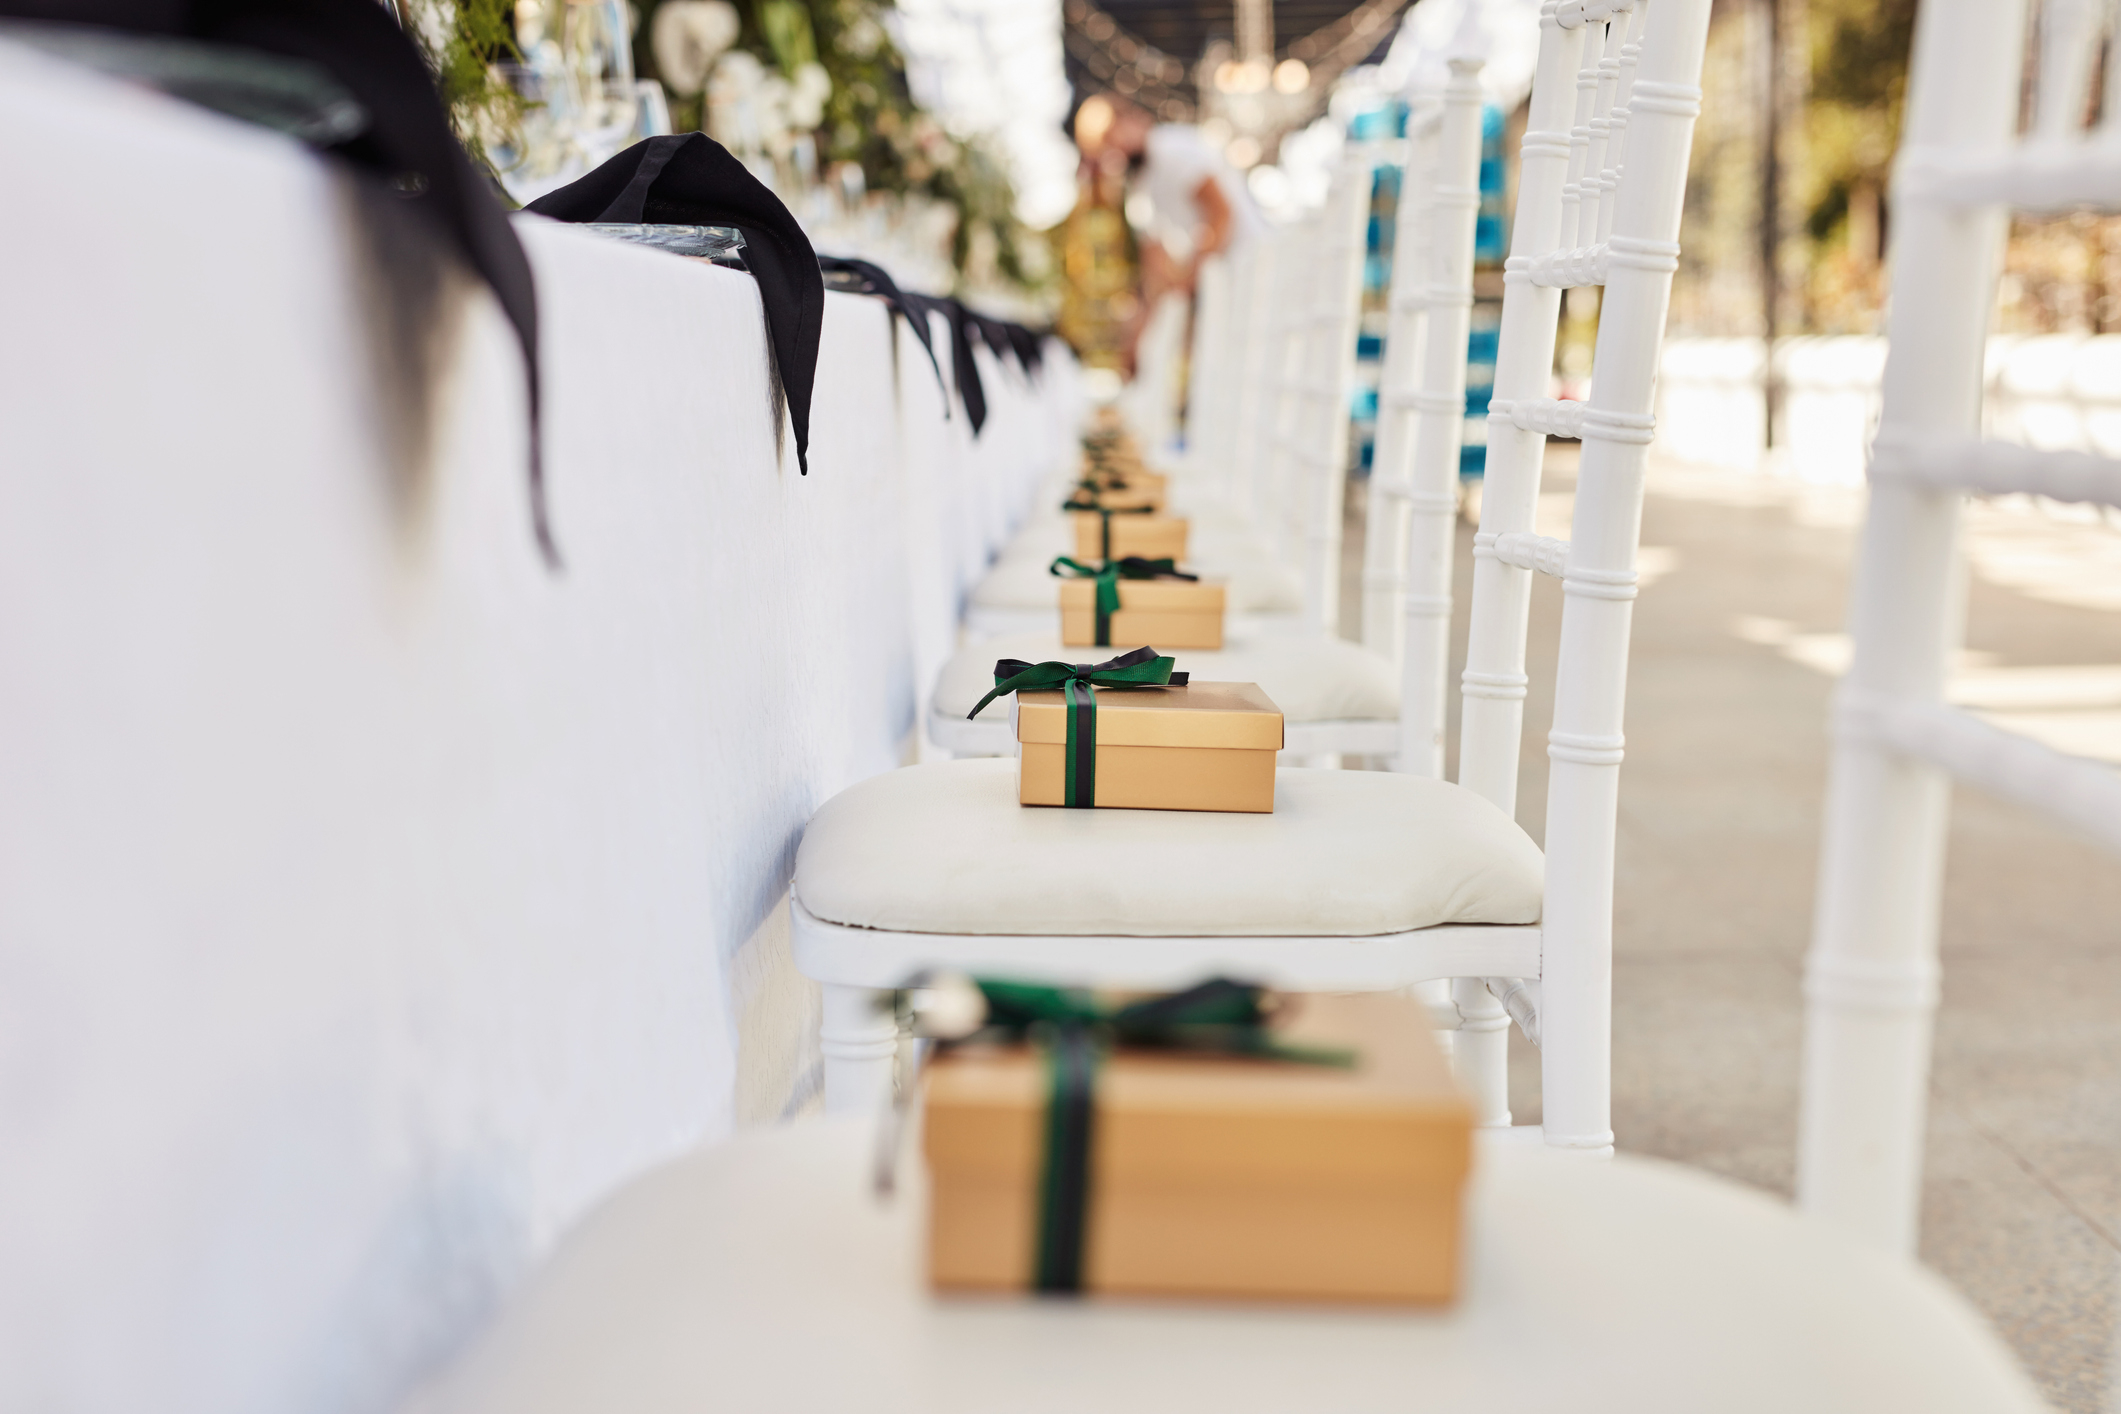 Party favors (little gift boxes with bows) on chairs